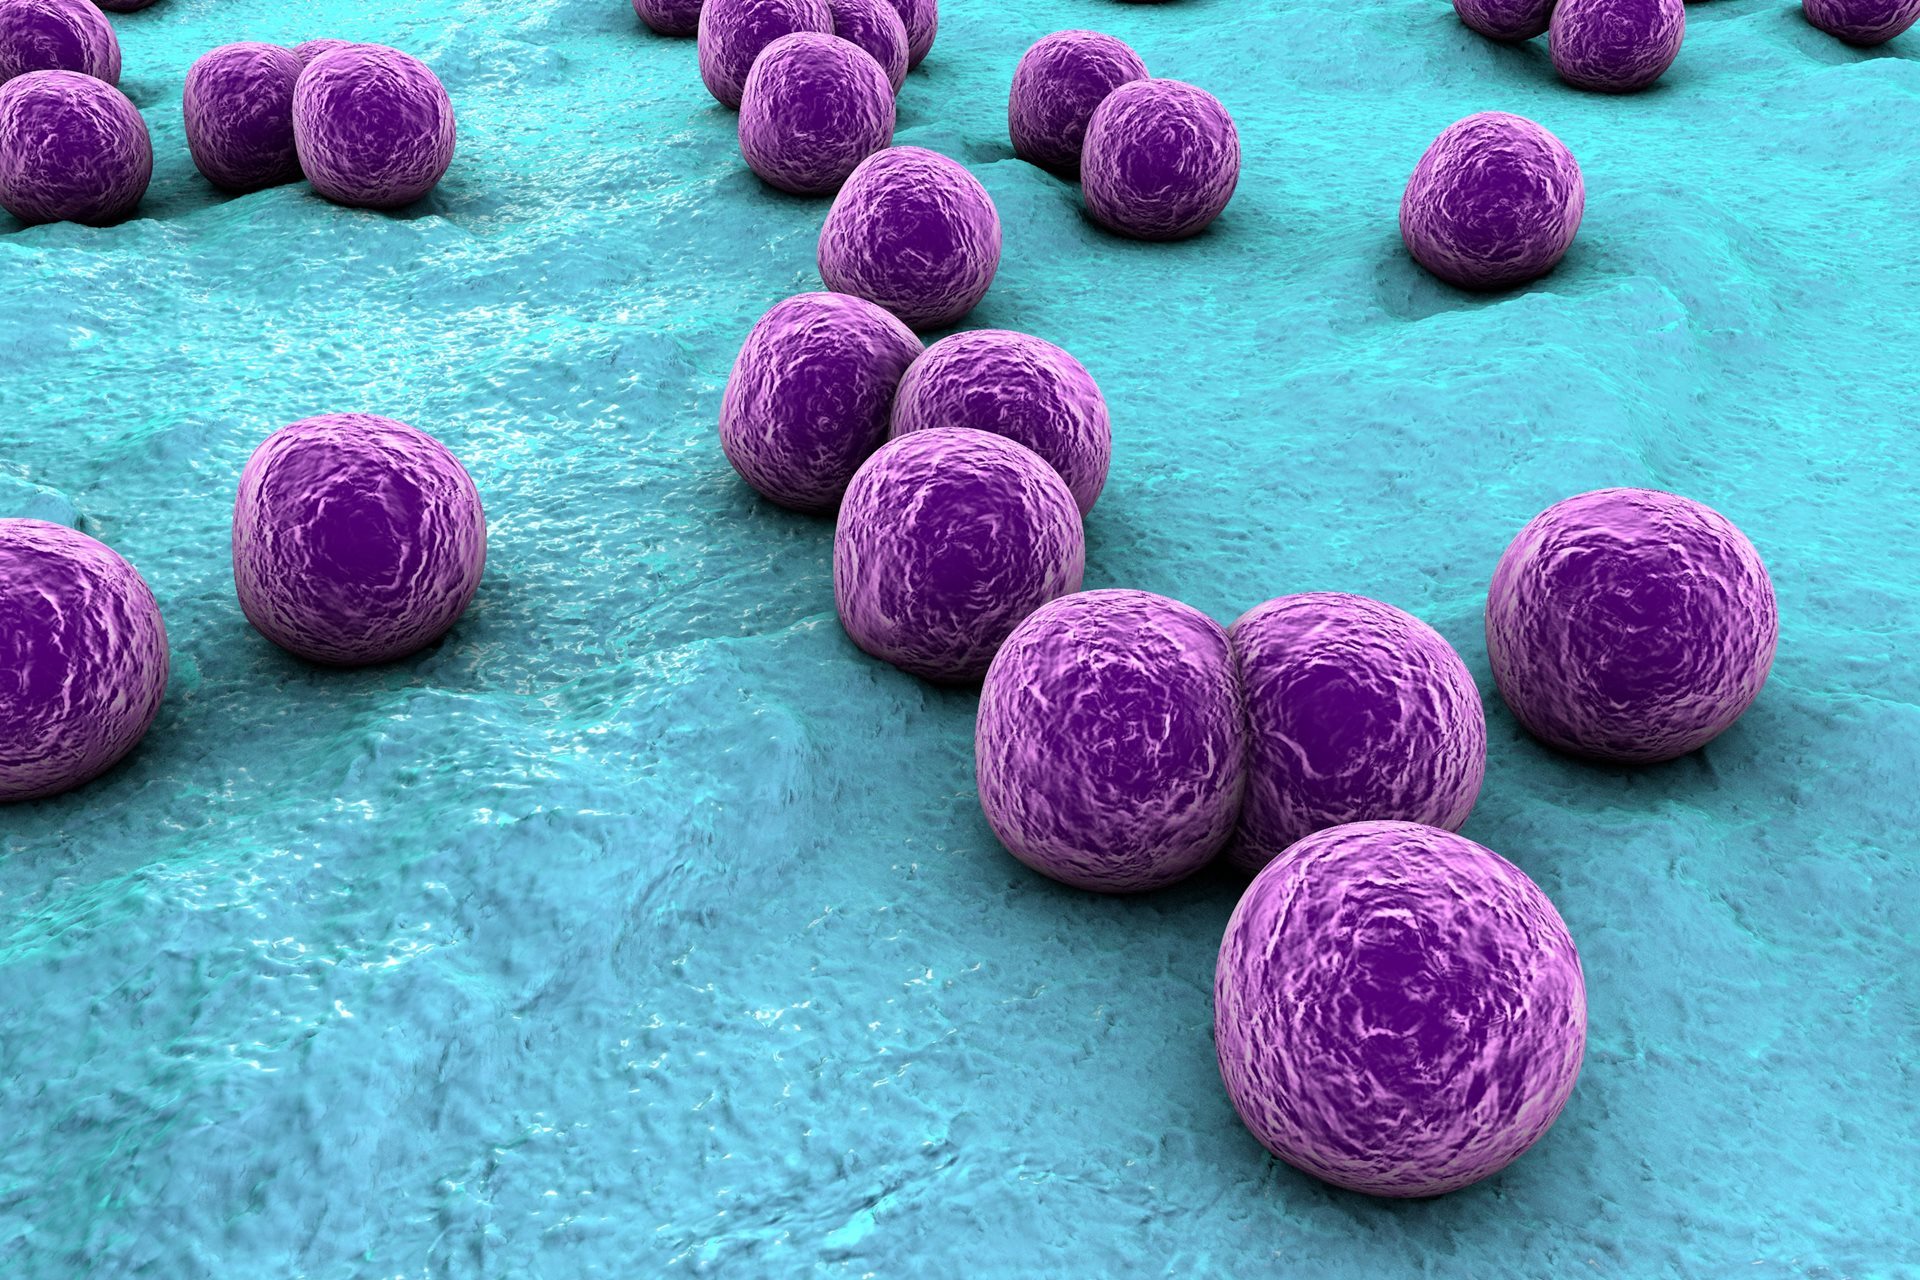 Trial of existing antibiotic for treating Staphylococcus aureus bacteremia  begins